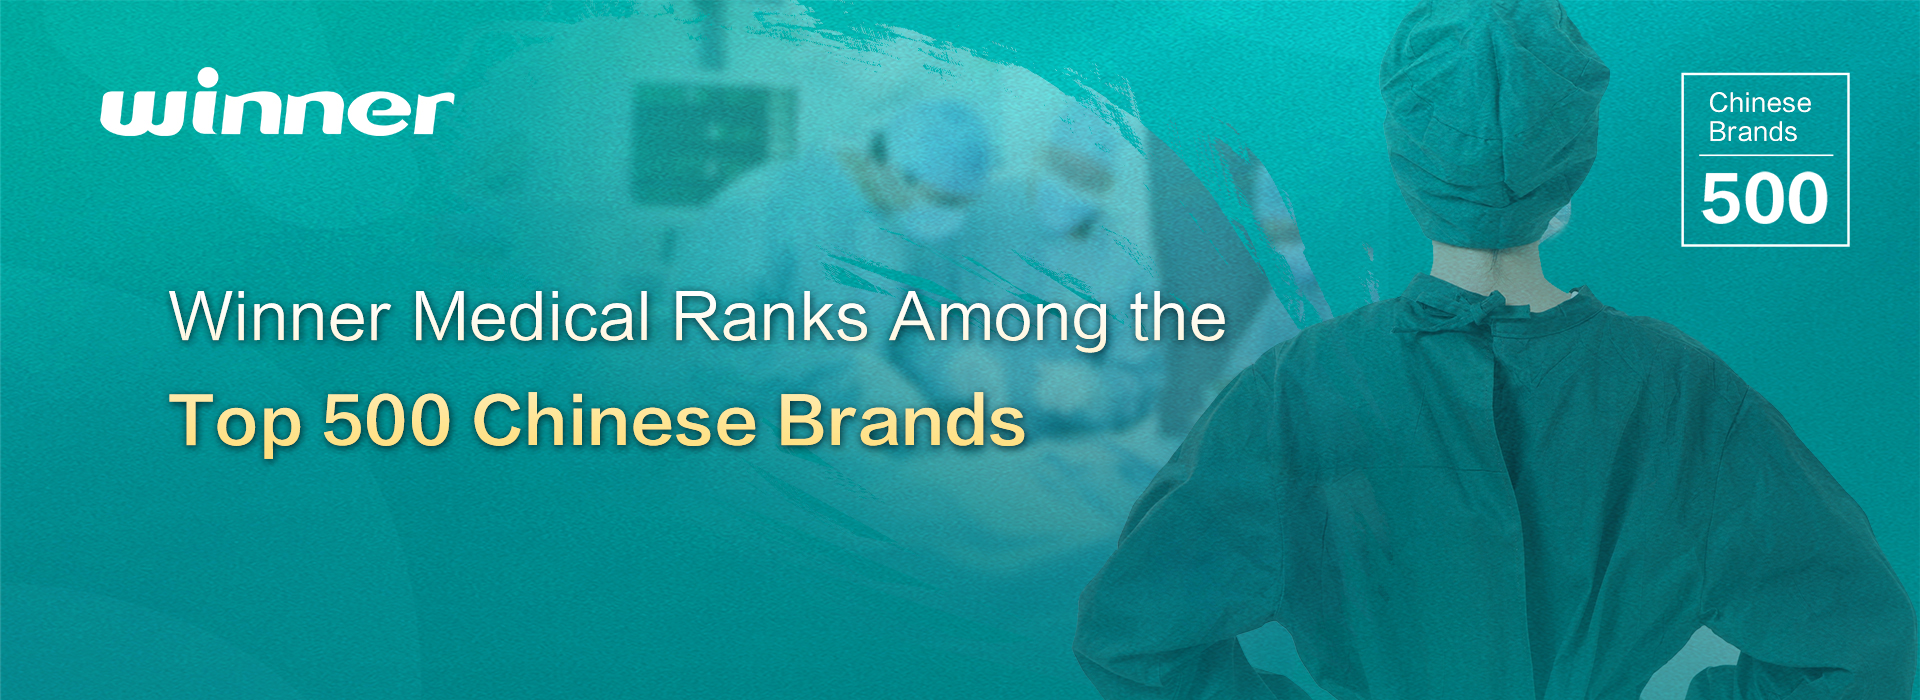 winner medical ranks among the top 500 chinese brands